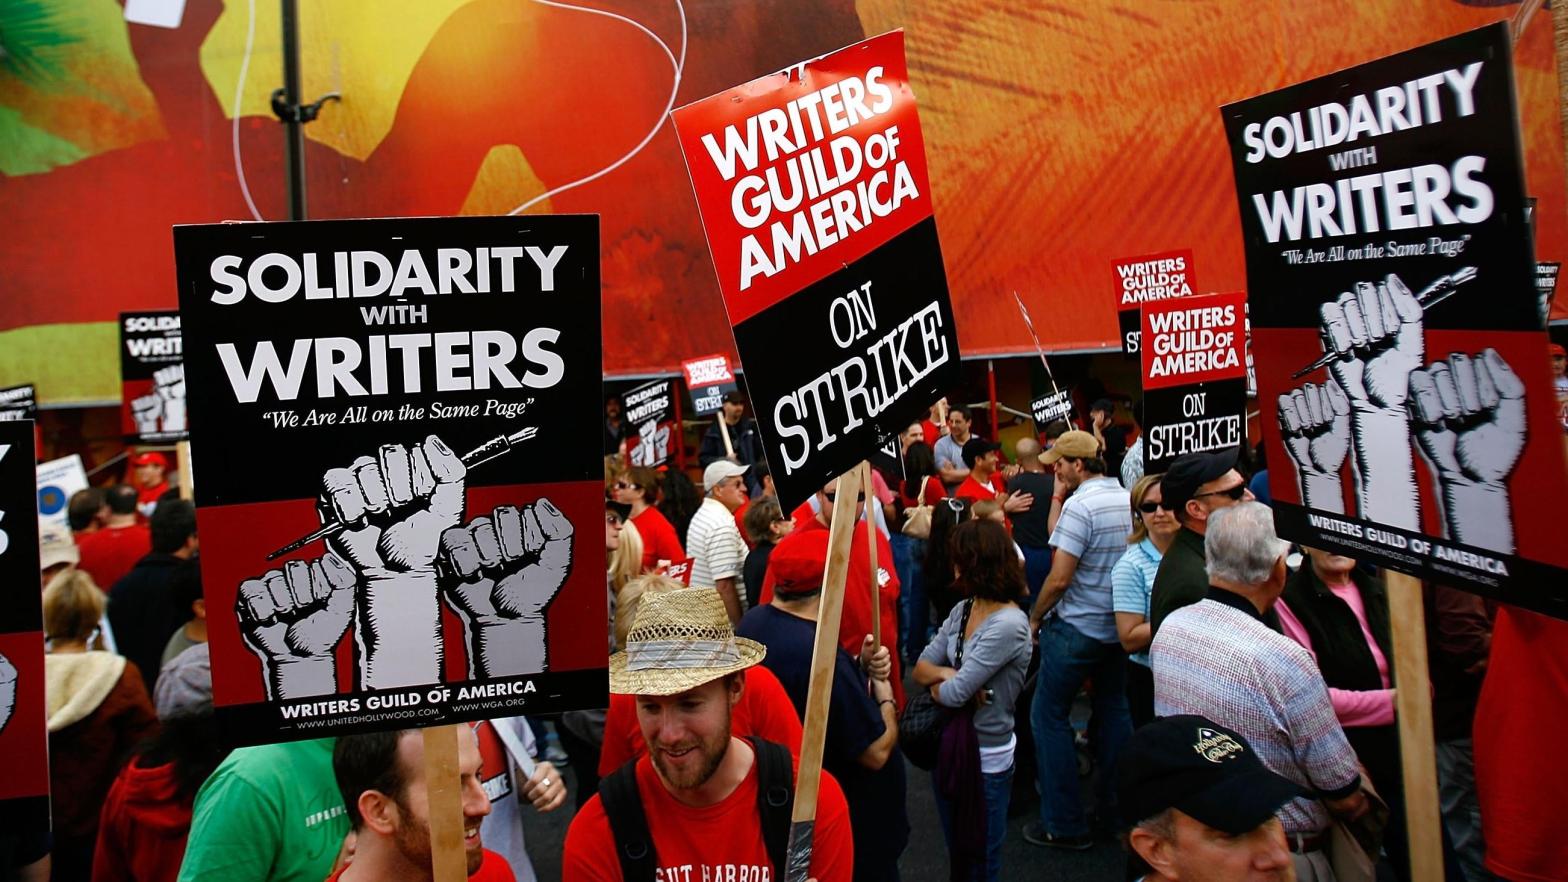 In this image from November 20, 2007, members of various unions including the Teamsters, Service Employees International Union (SEIU), and California Nurses Association march in solidarity with striking Hollywood writers during the labour dispute between the Writers Guild of America (WGA) and the Alliance of Motion Picture and Television Producers (AMPTP). (Image: David McNew, Getty Images)